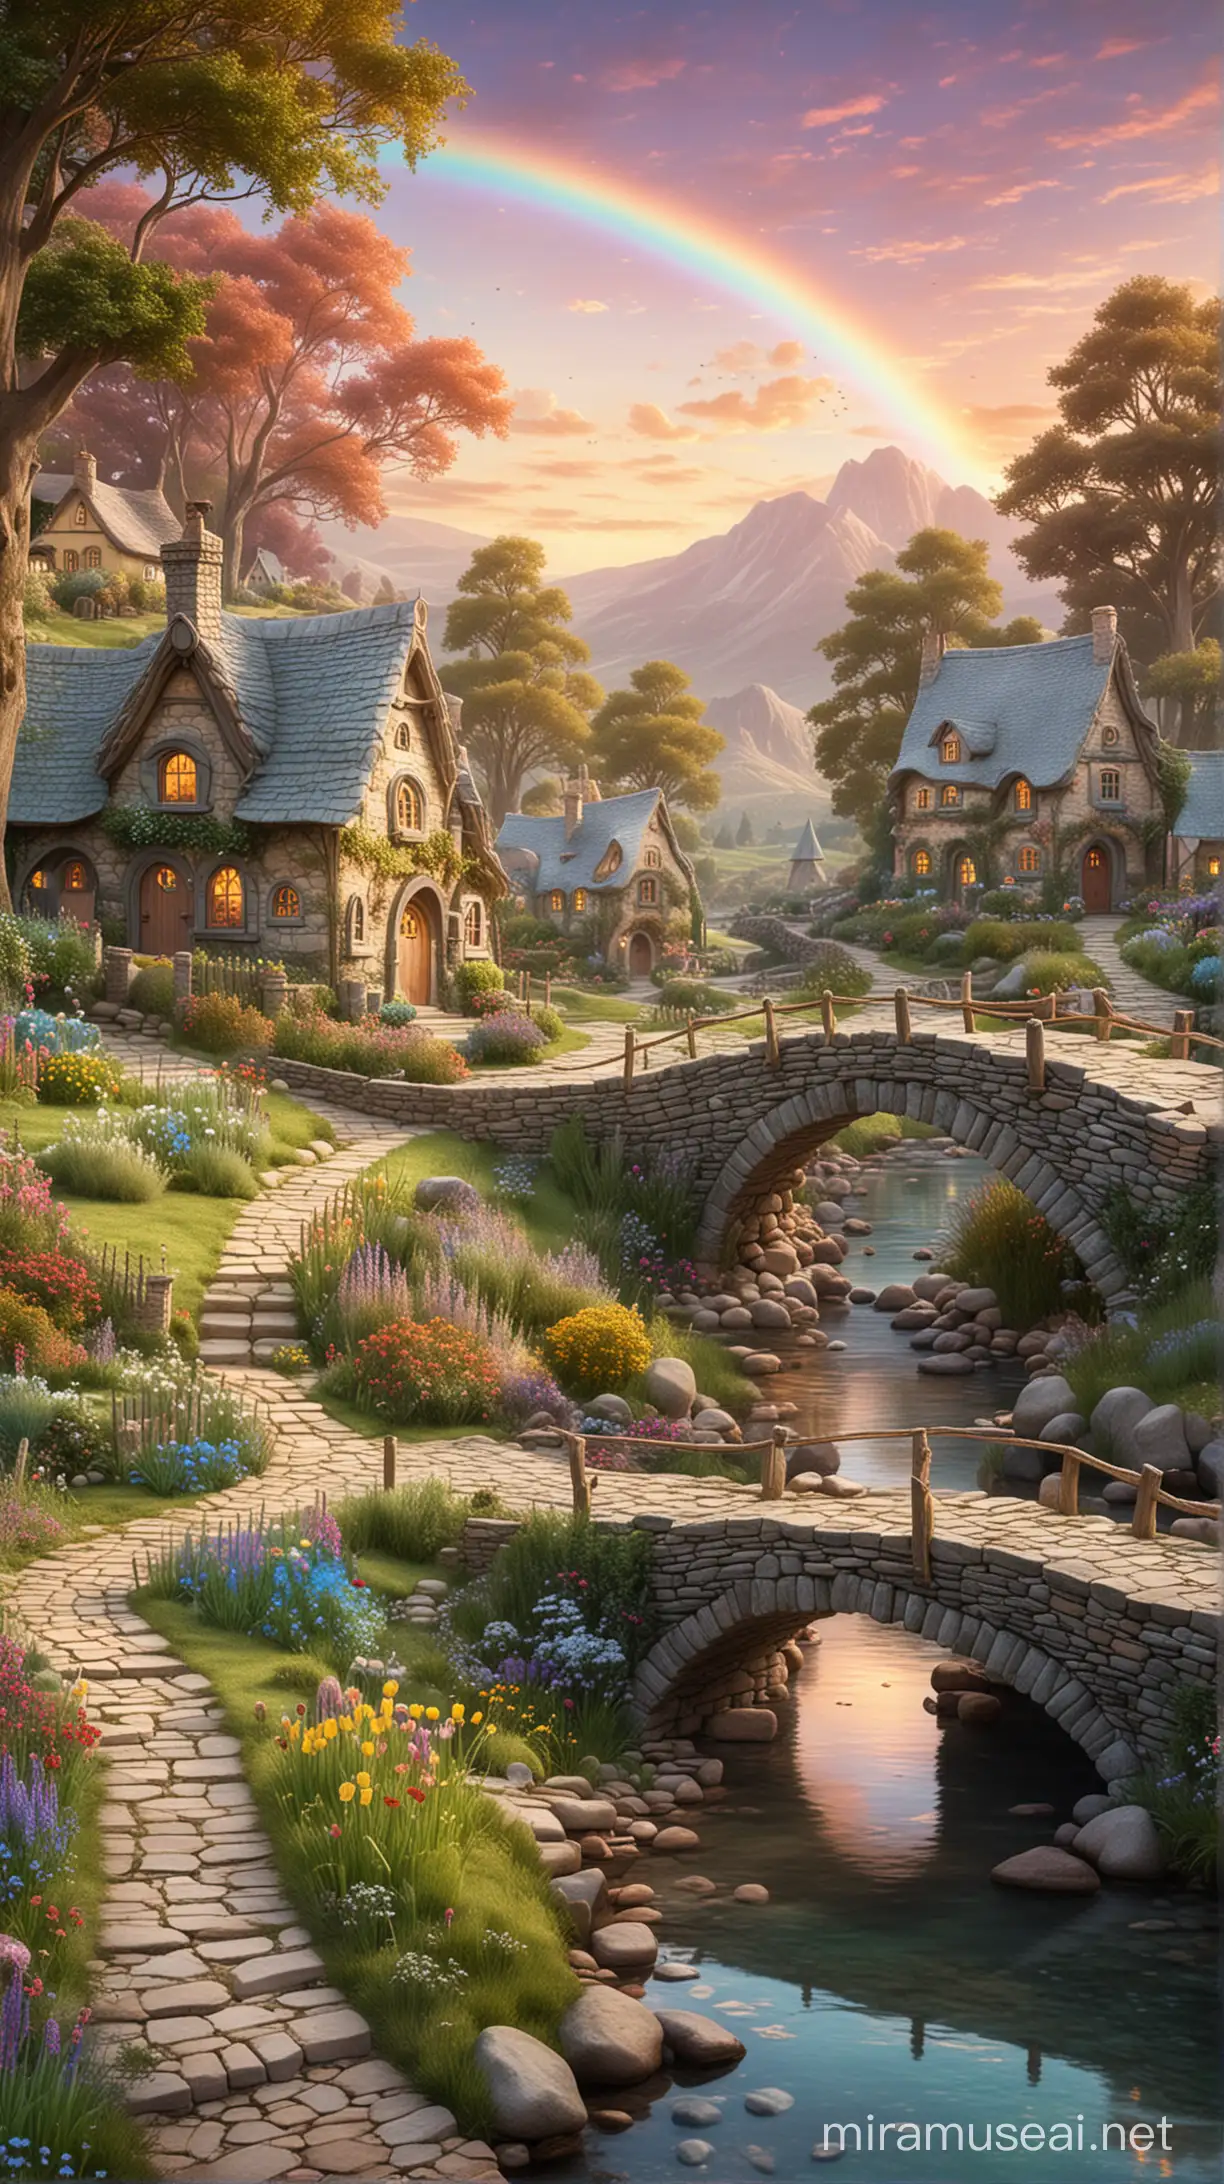 Enchanting Fairy Village Landscape with Pastel Rainbow and Fantasy Cottages